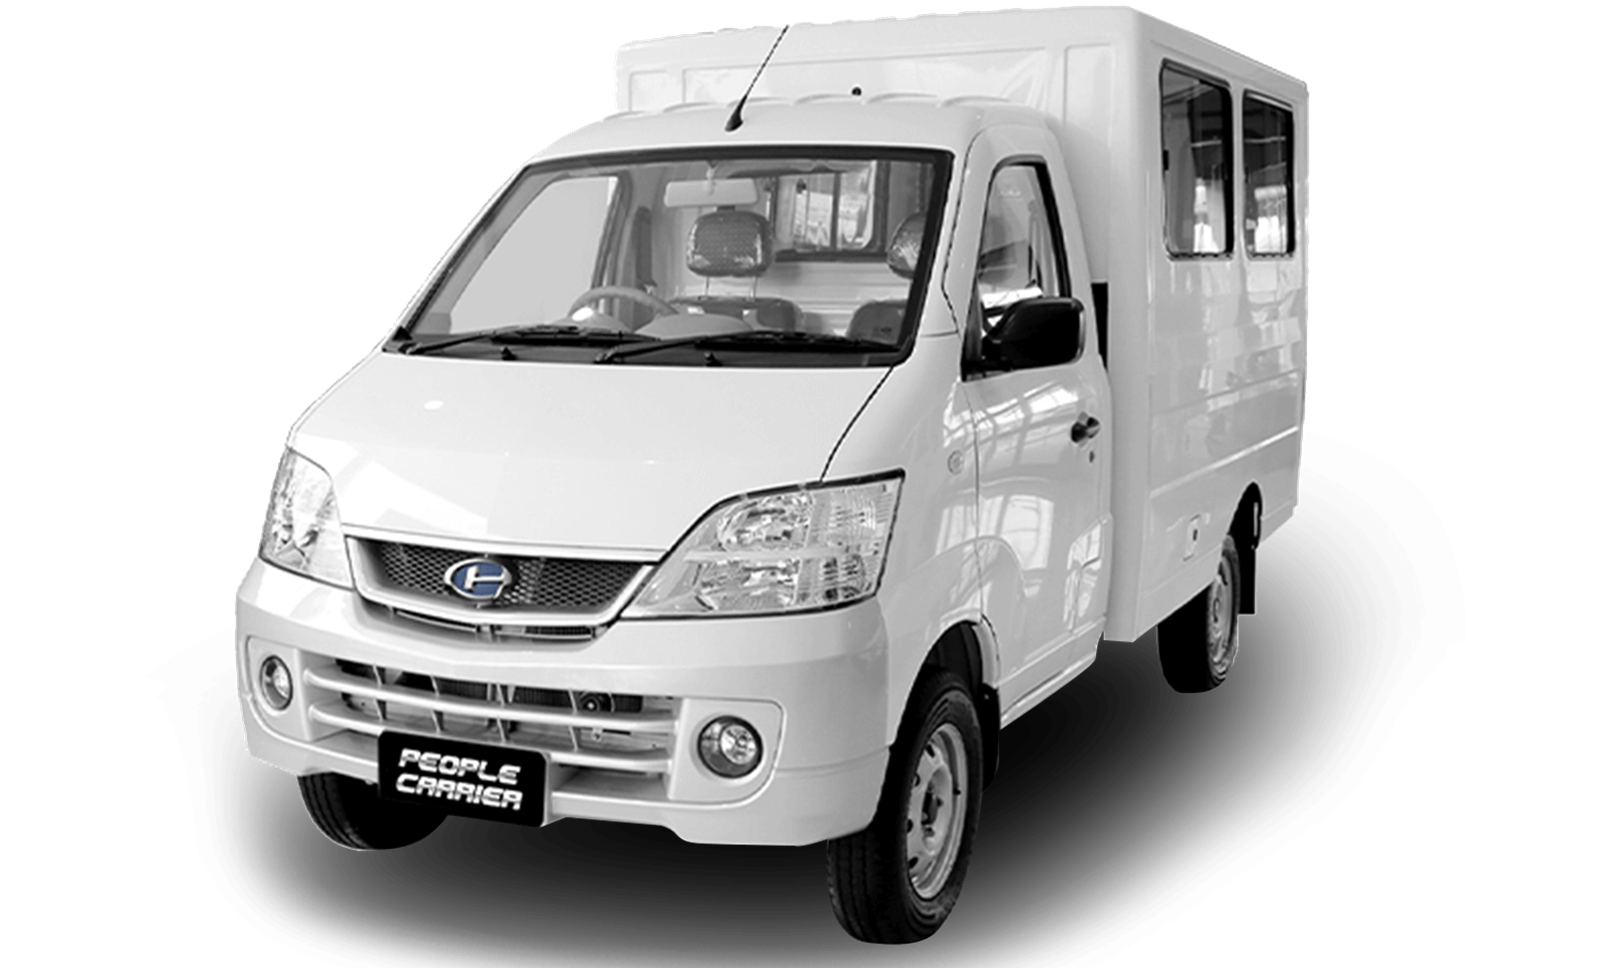 Changhe Freedom People Carrier